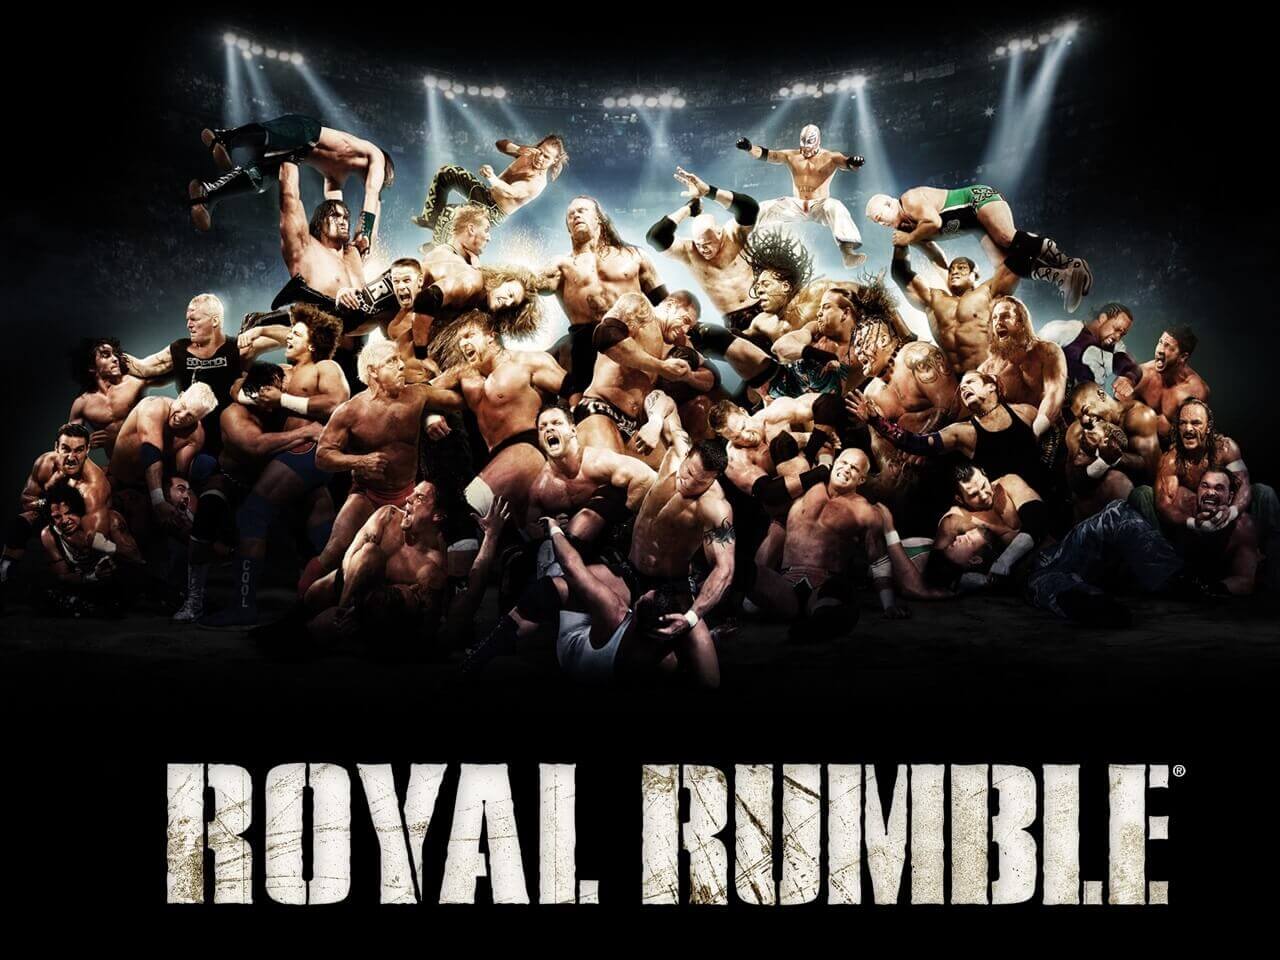 Every WWE Royal Rumble Winners List With Entrance Number